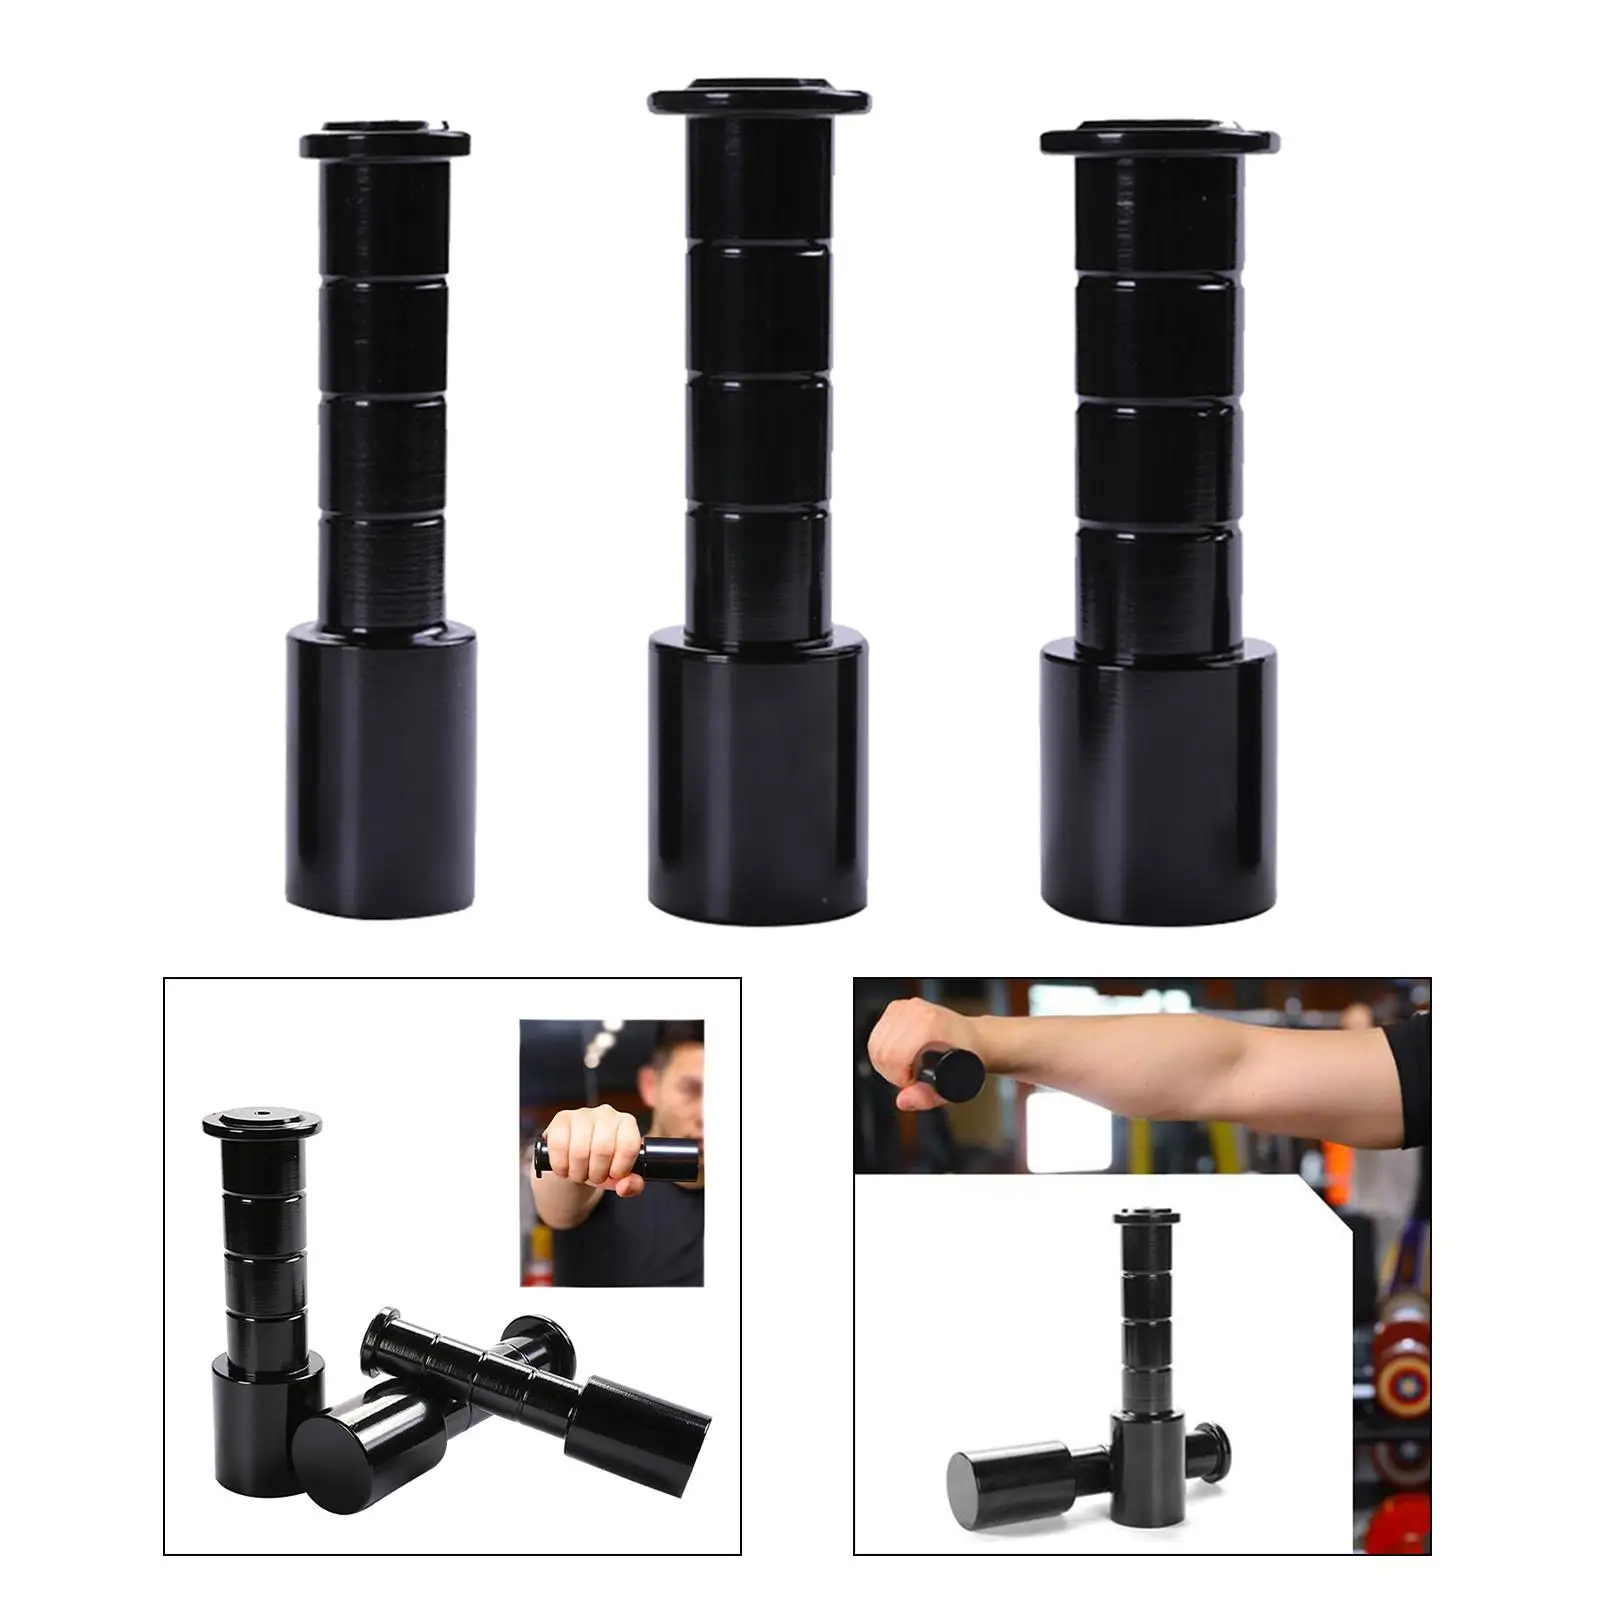 Hand Weight Anti Slide Grip Training Equipment Trainer Muscle Weight Lifting Boxing for Exercise Home Gym Kickboxing Yoga Cardio